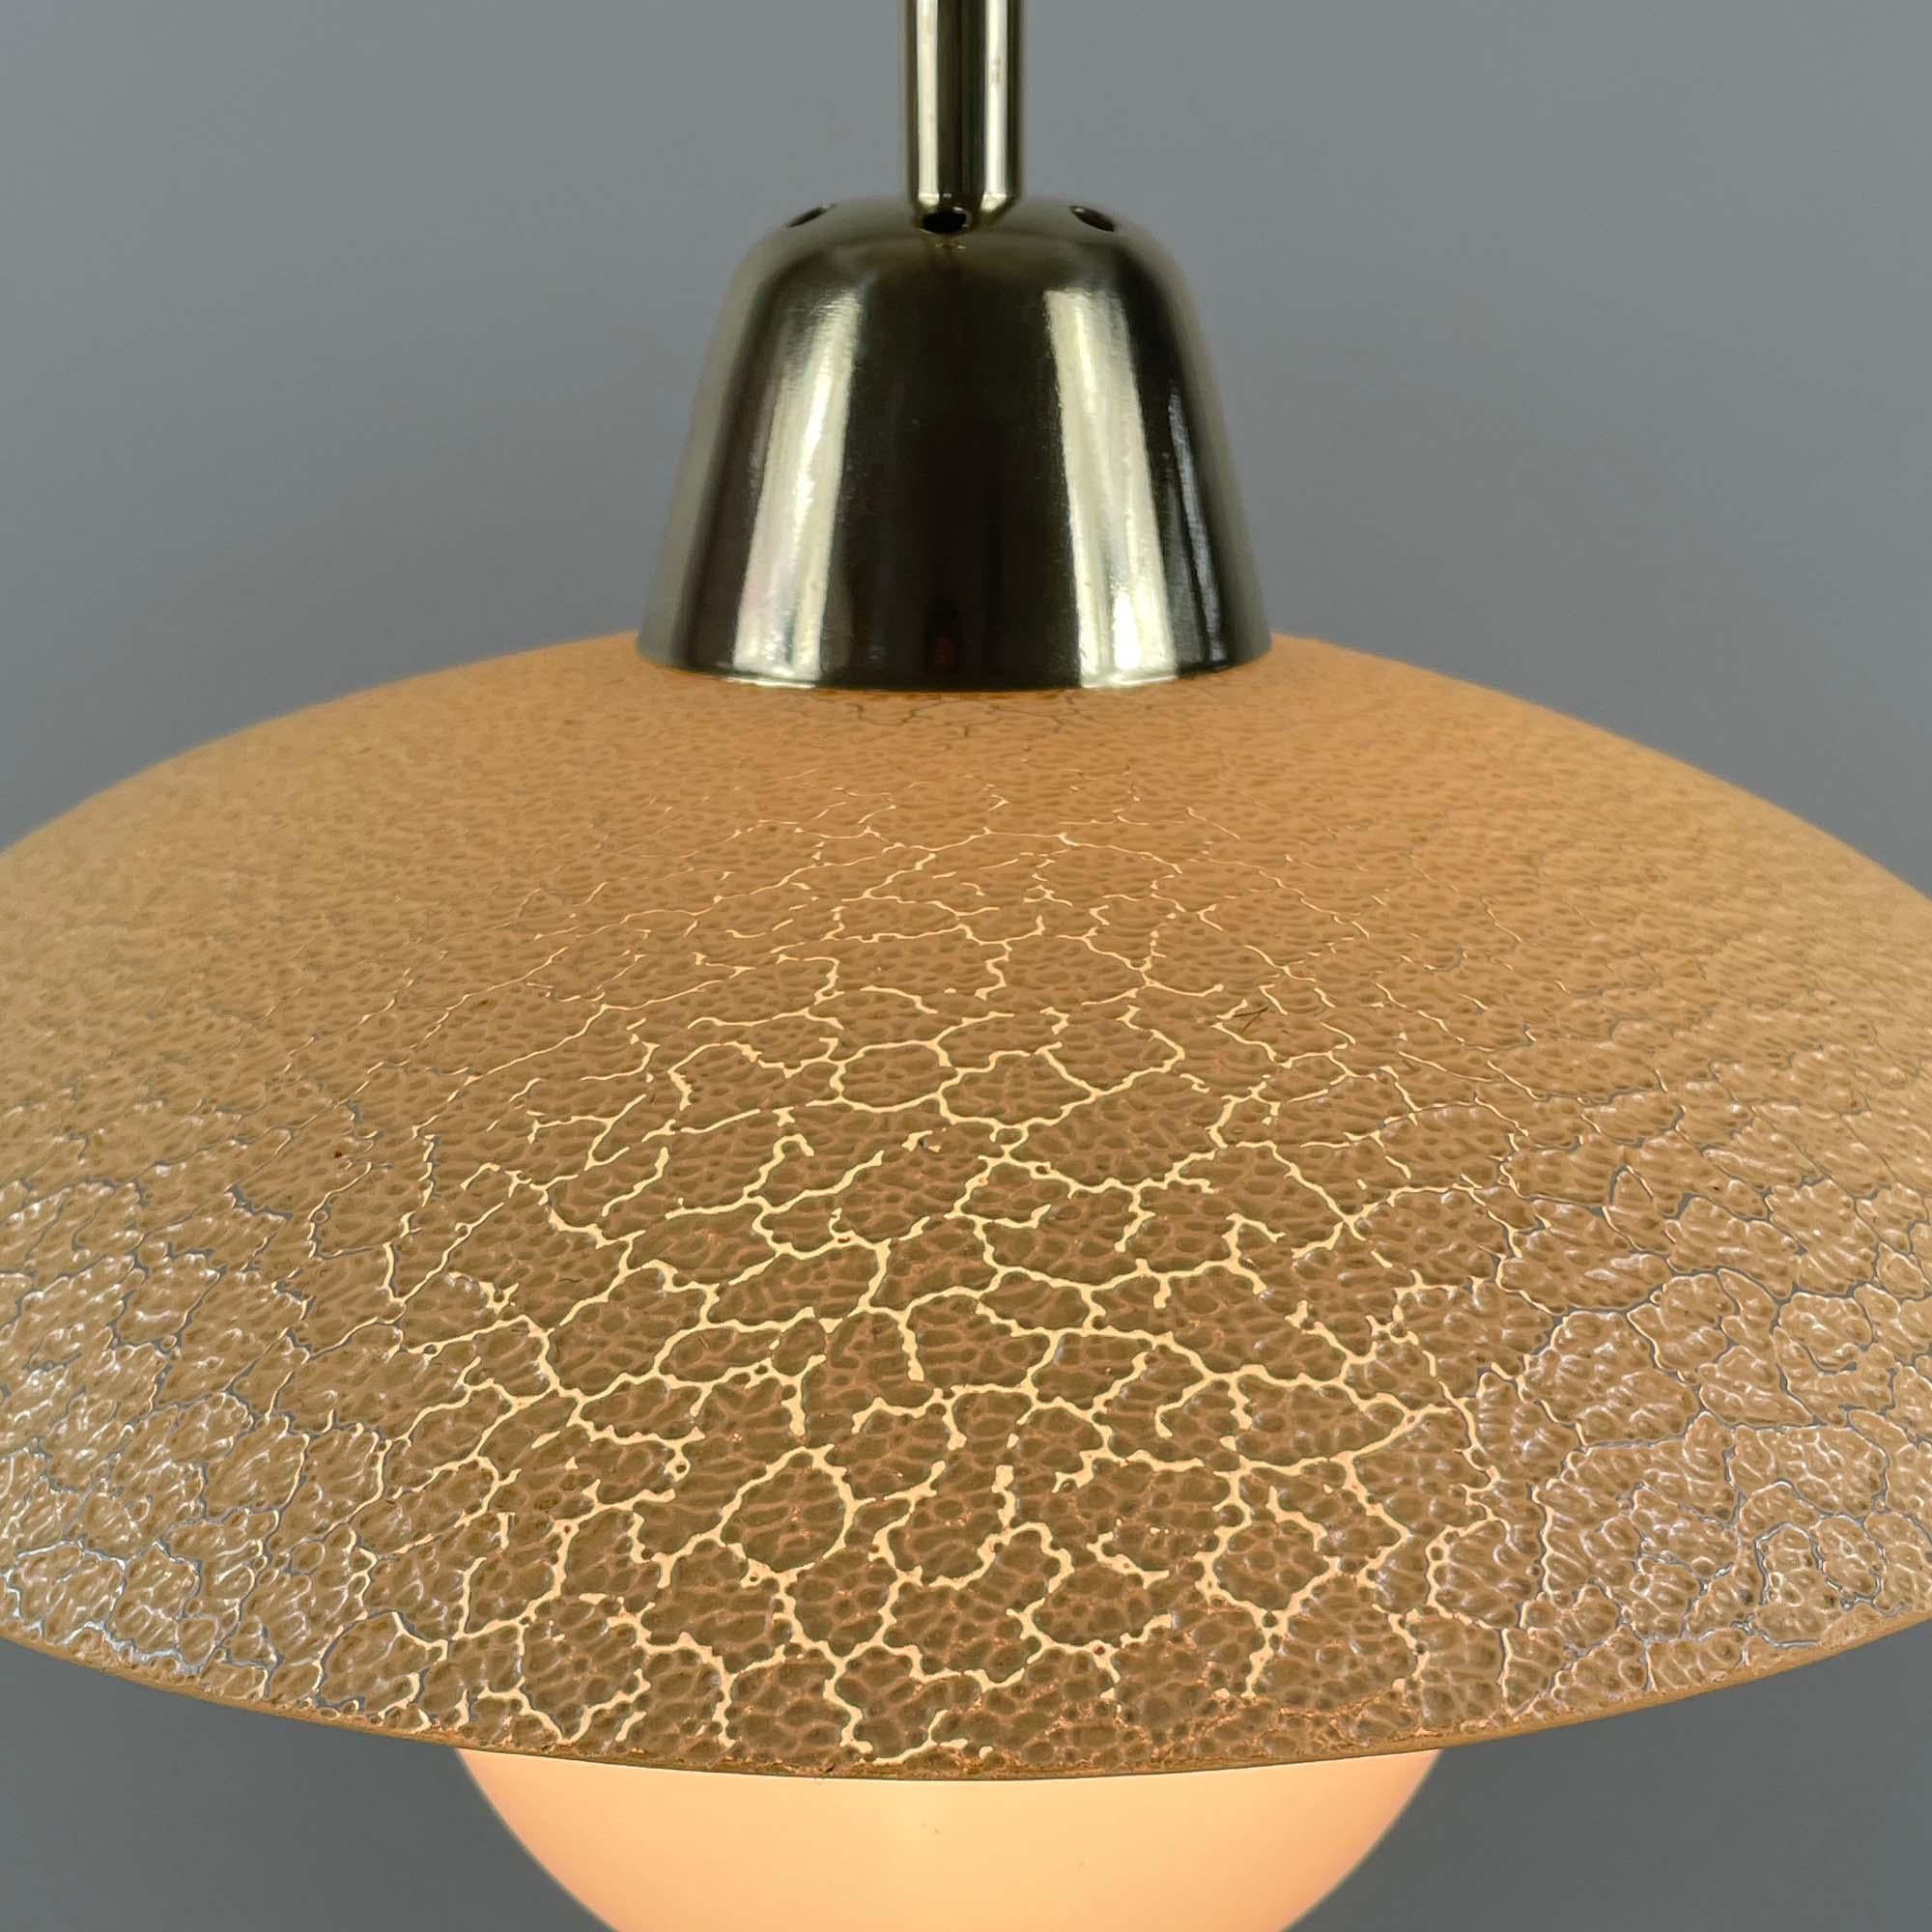 Cream Textured Glass and Brass Pendants, Sweden 1940s to 1950s For Sale 4